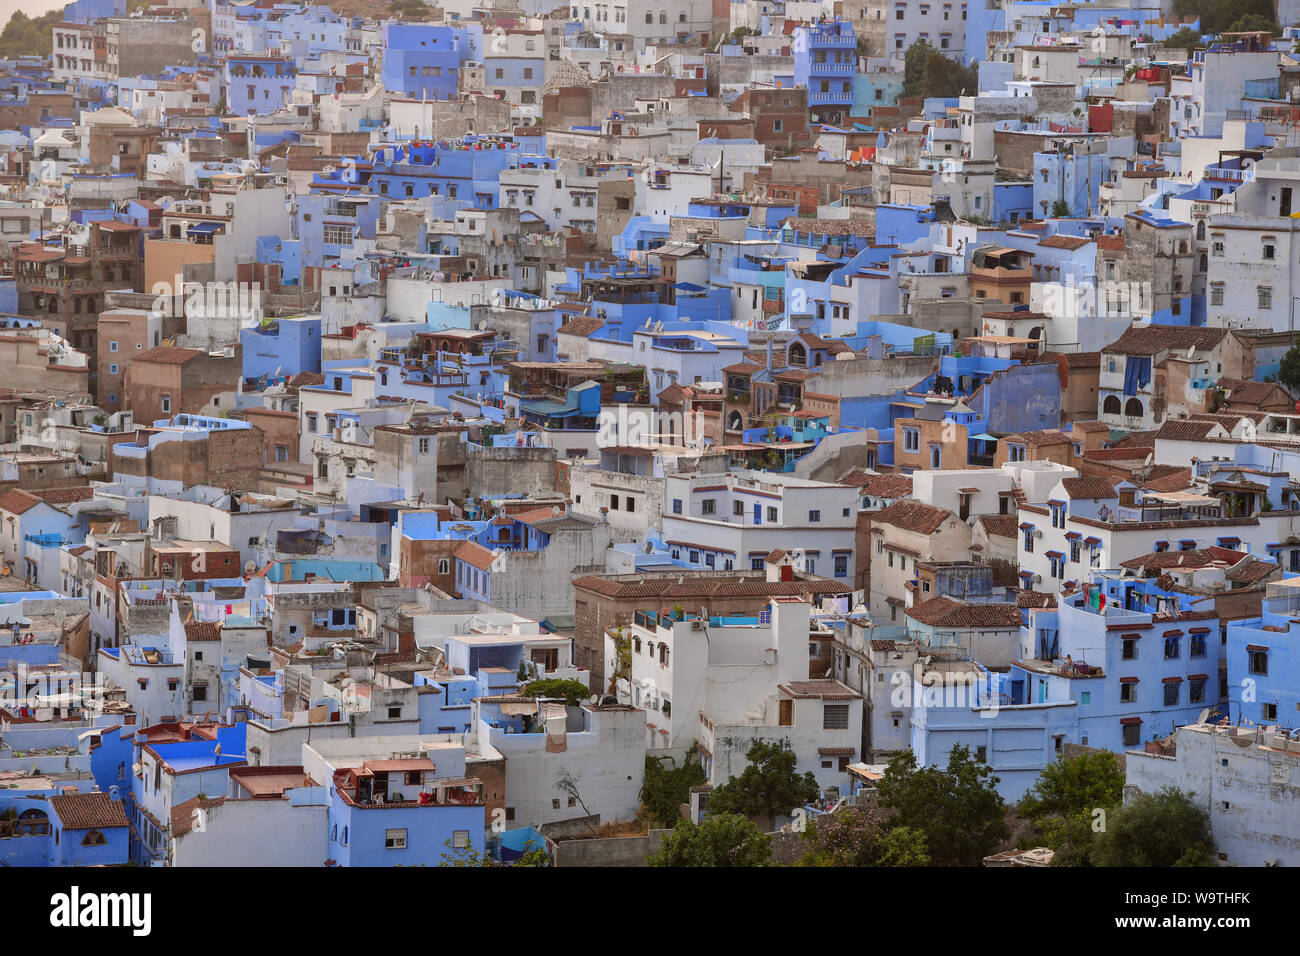 Close-up of buildings in Chefchaouen, Morocco Stock Photo